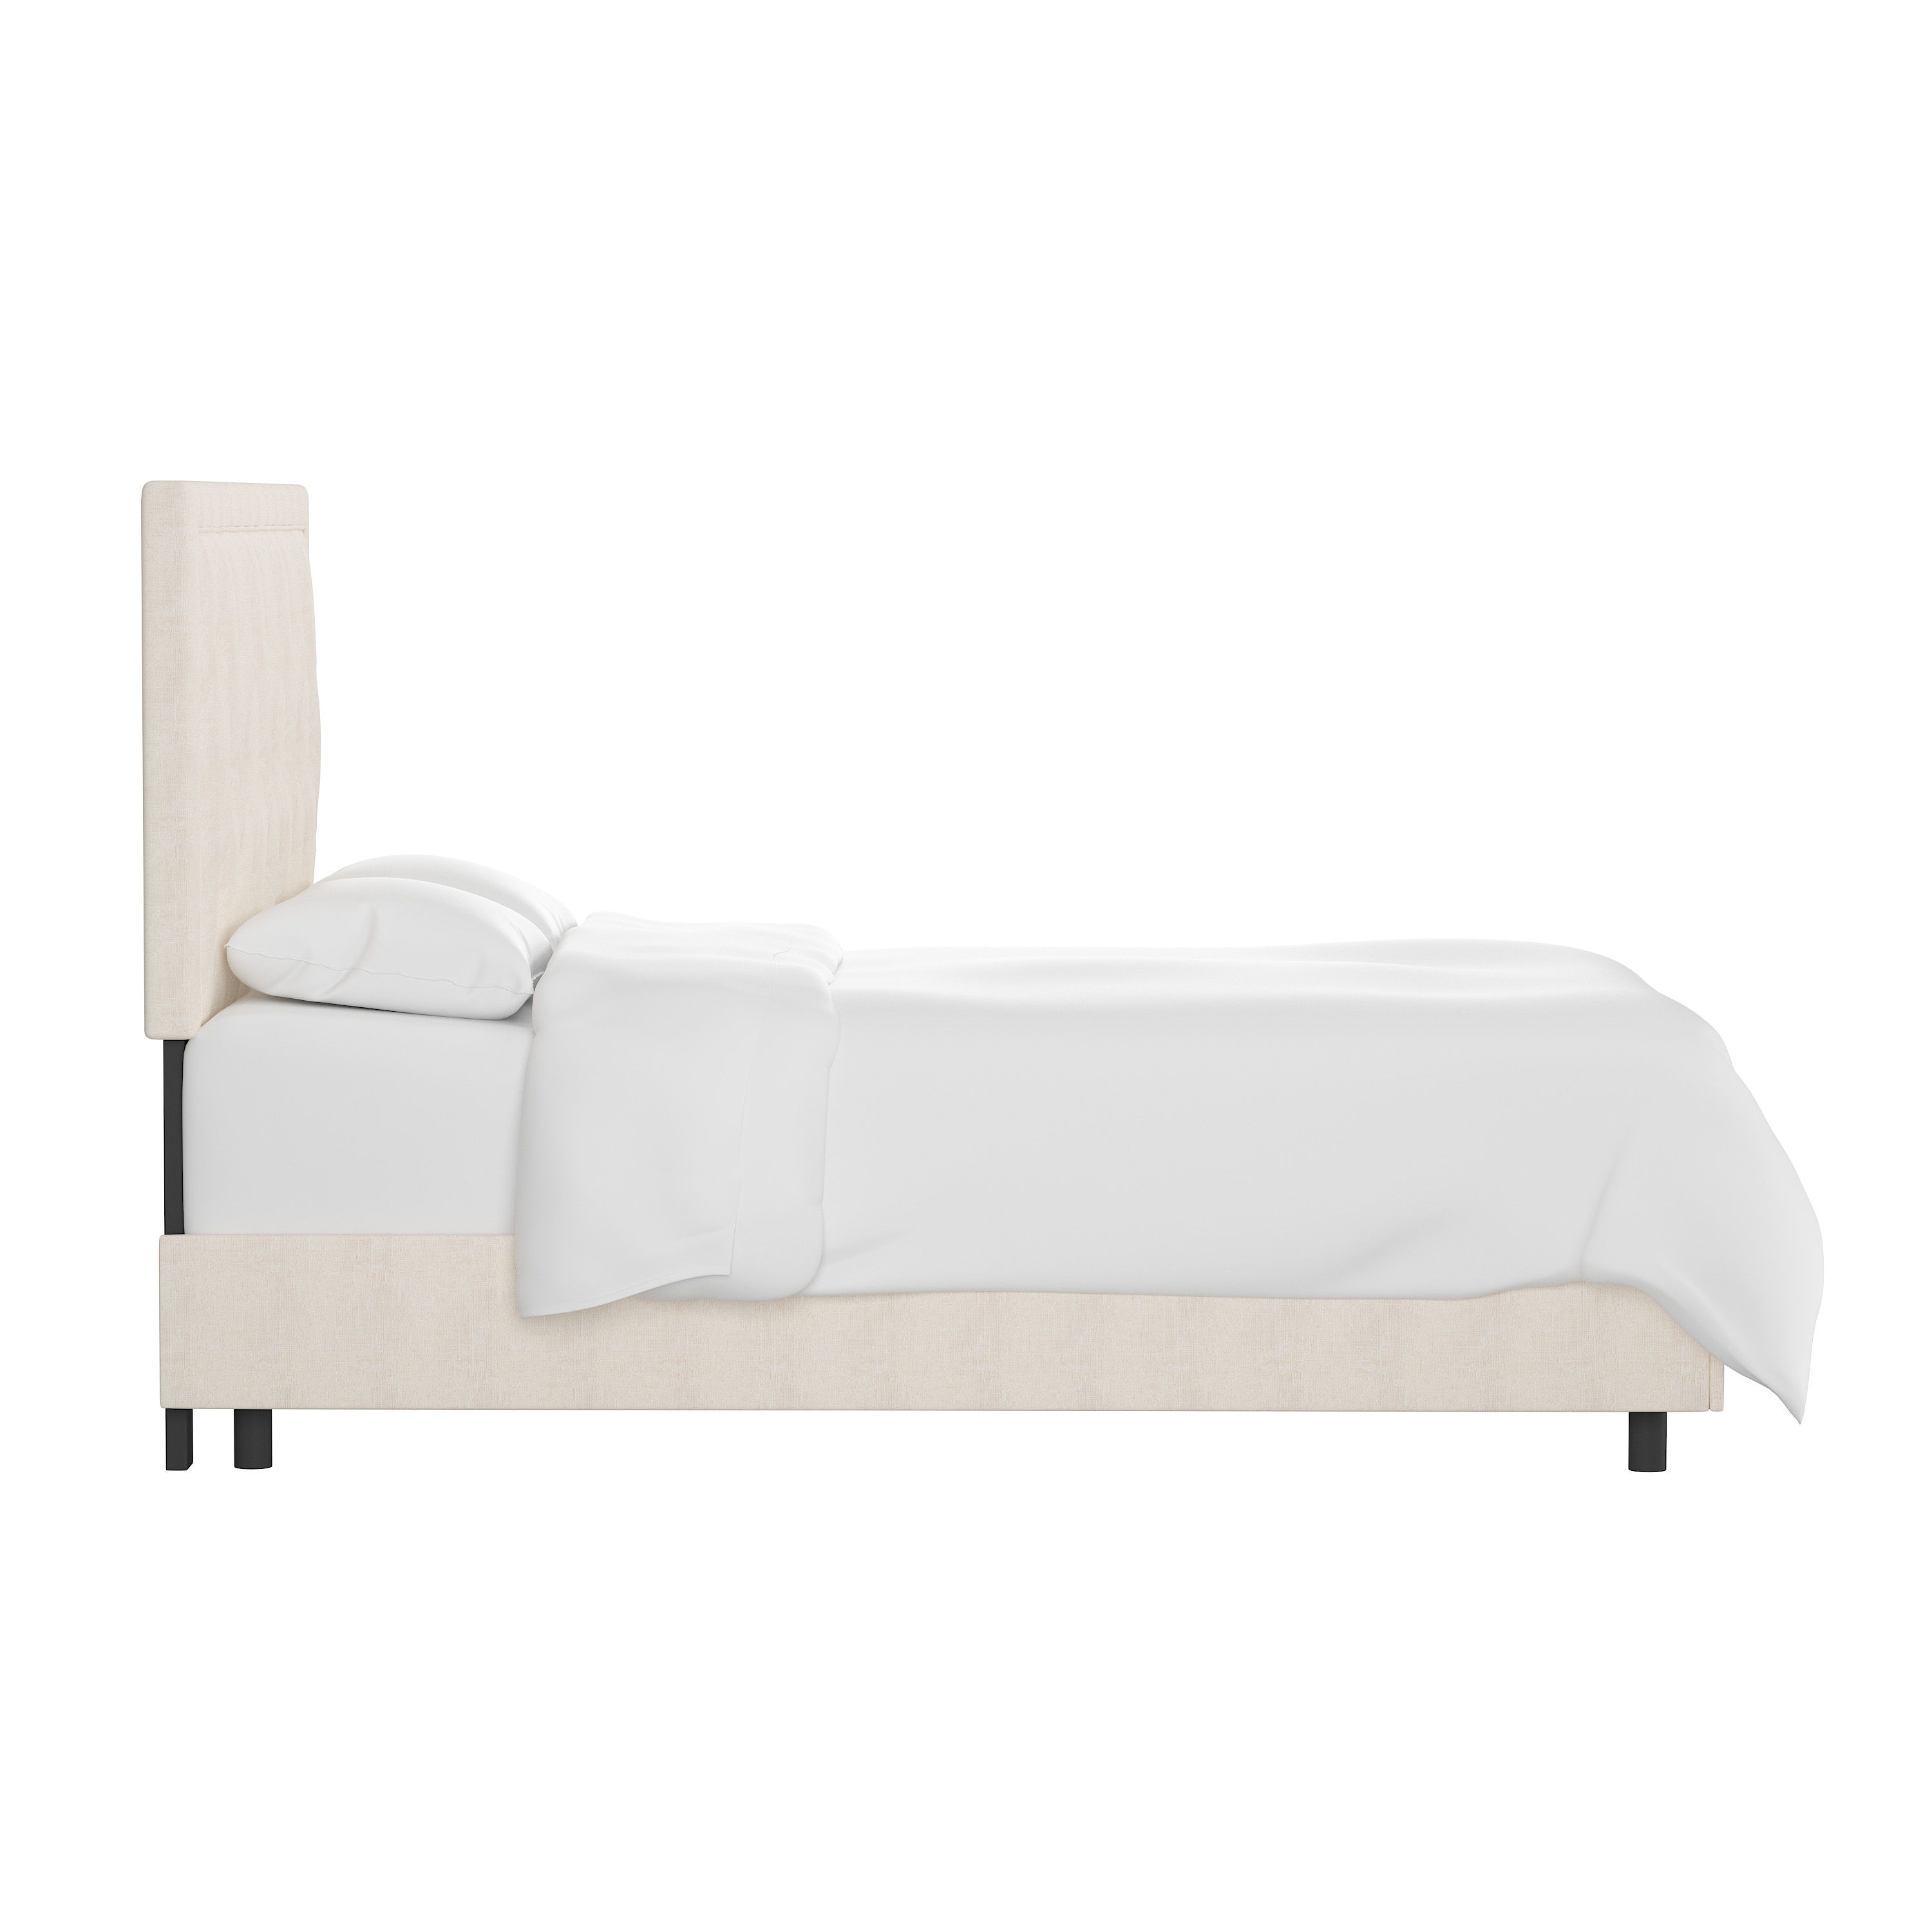 Lafayette Bed, Queen, White - Image 2